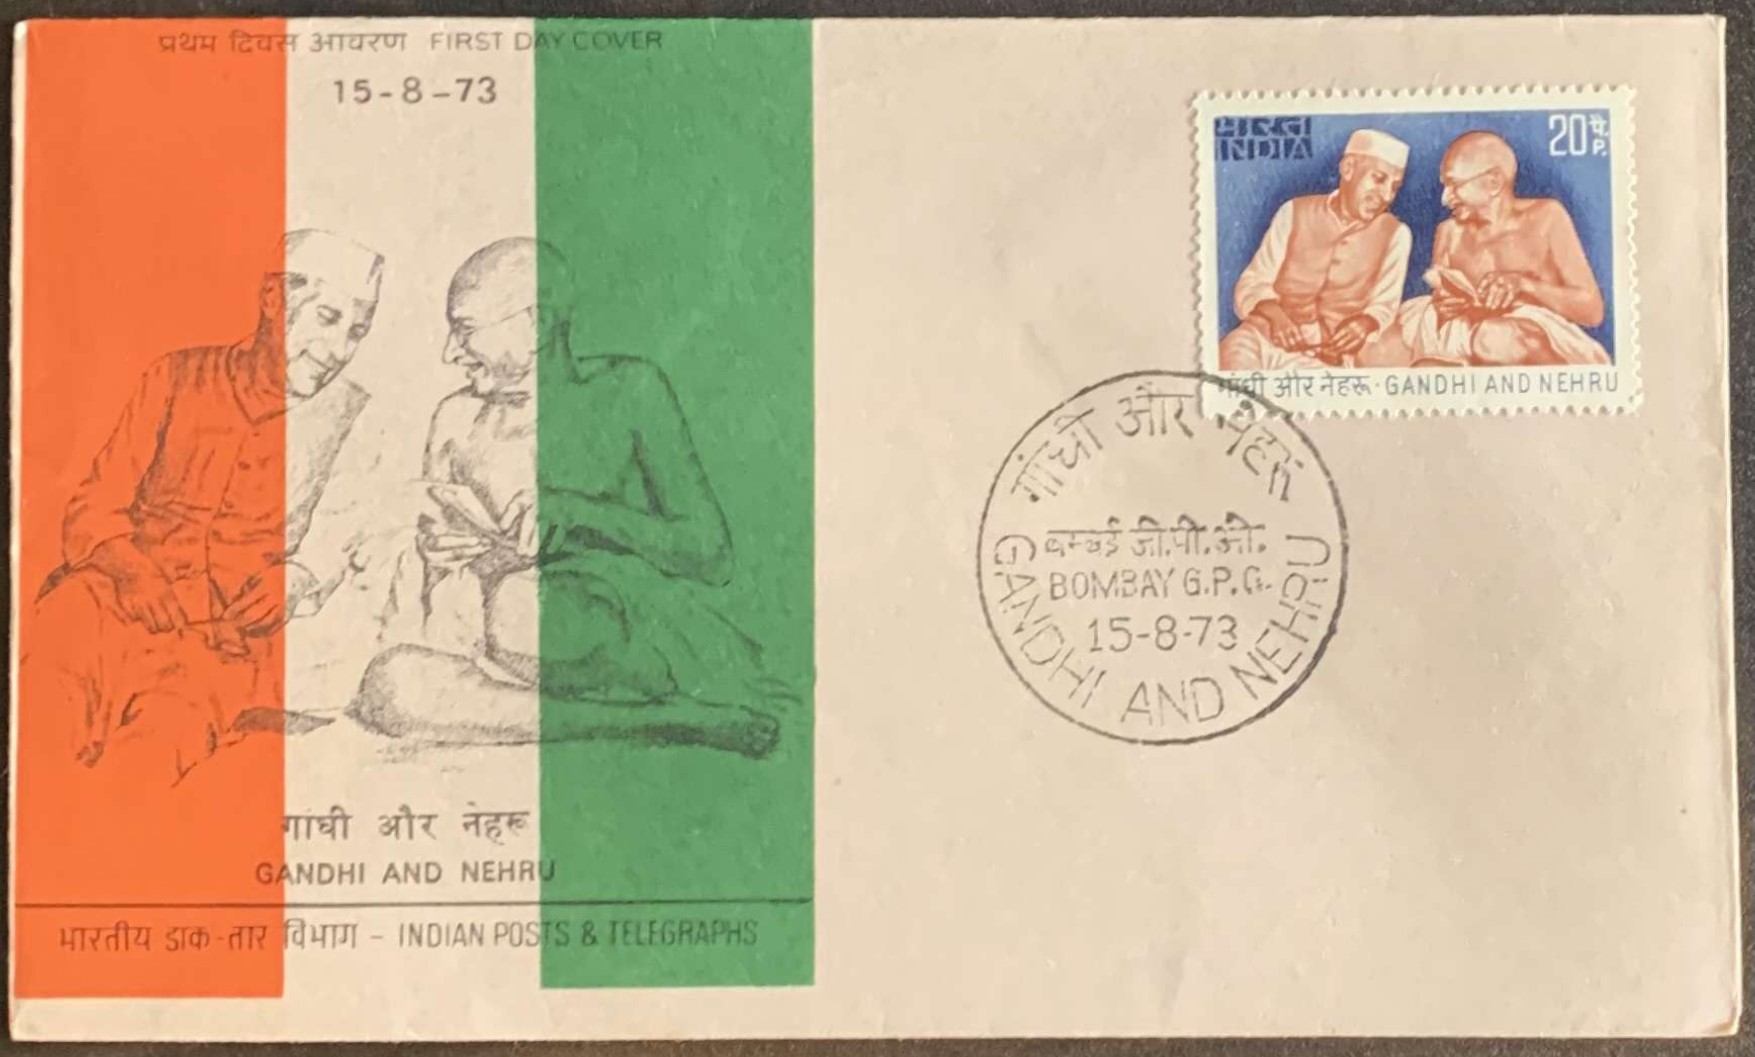 India 1973 Gandhi And Nehru First Day Cover